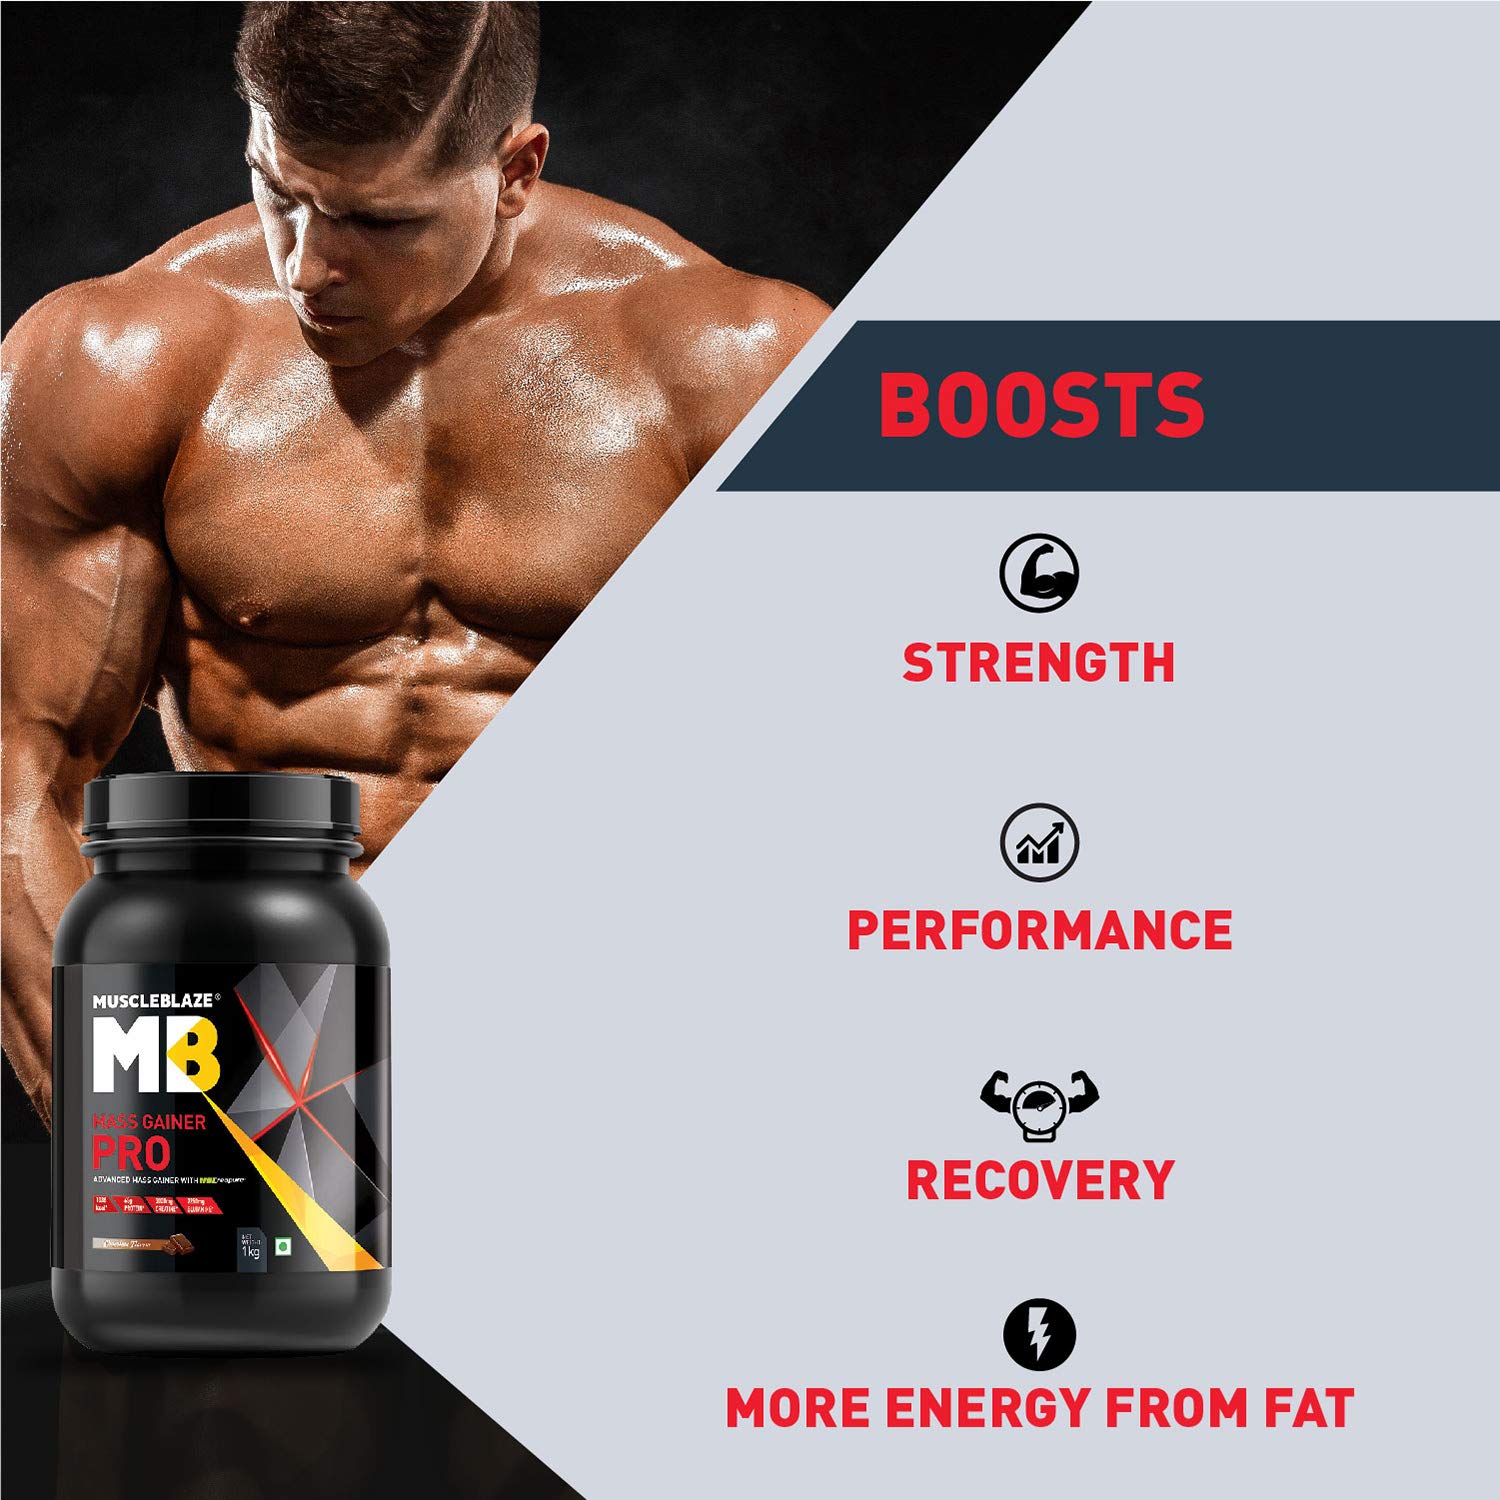 Image Of Muscleblaze Mass Gainer Pro With Creapure Beast Nutrition